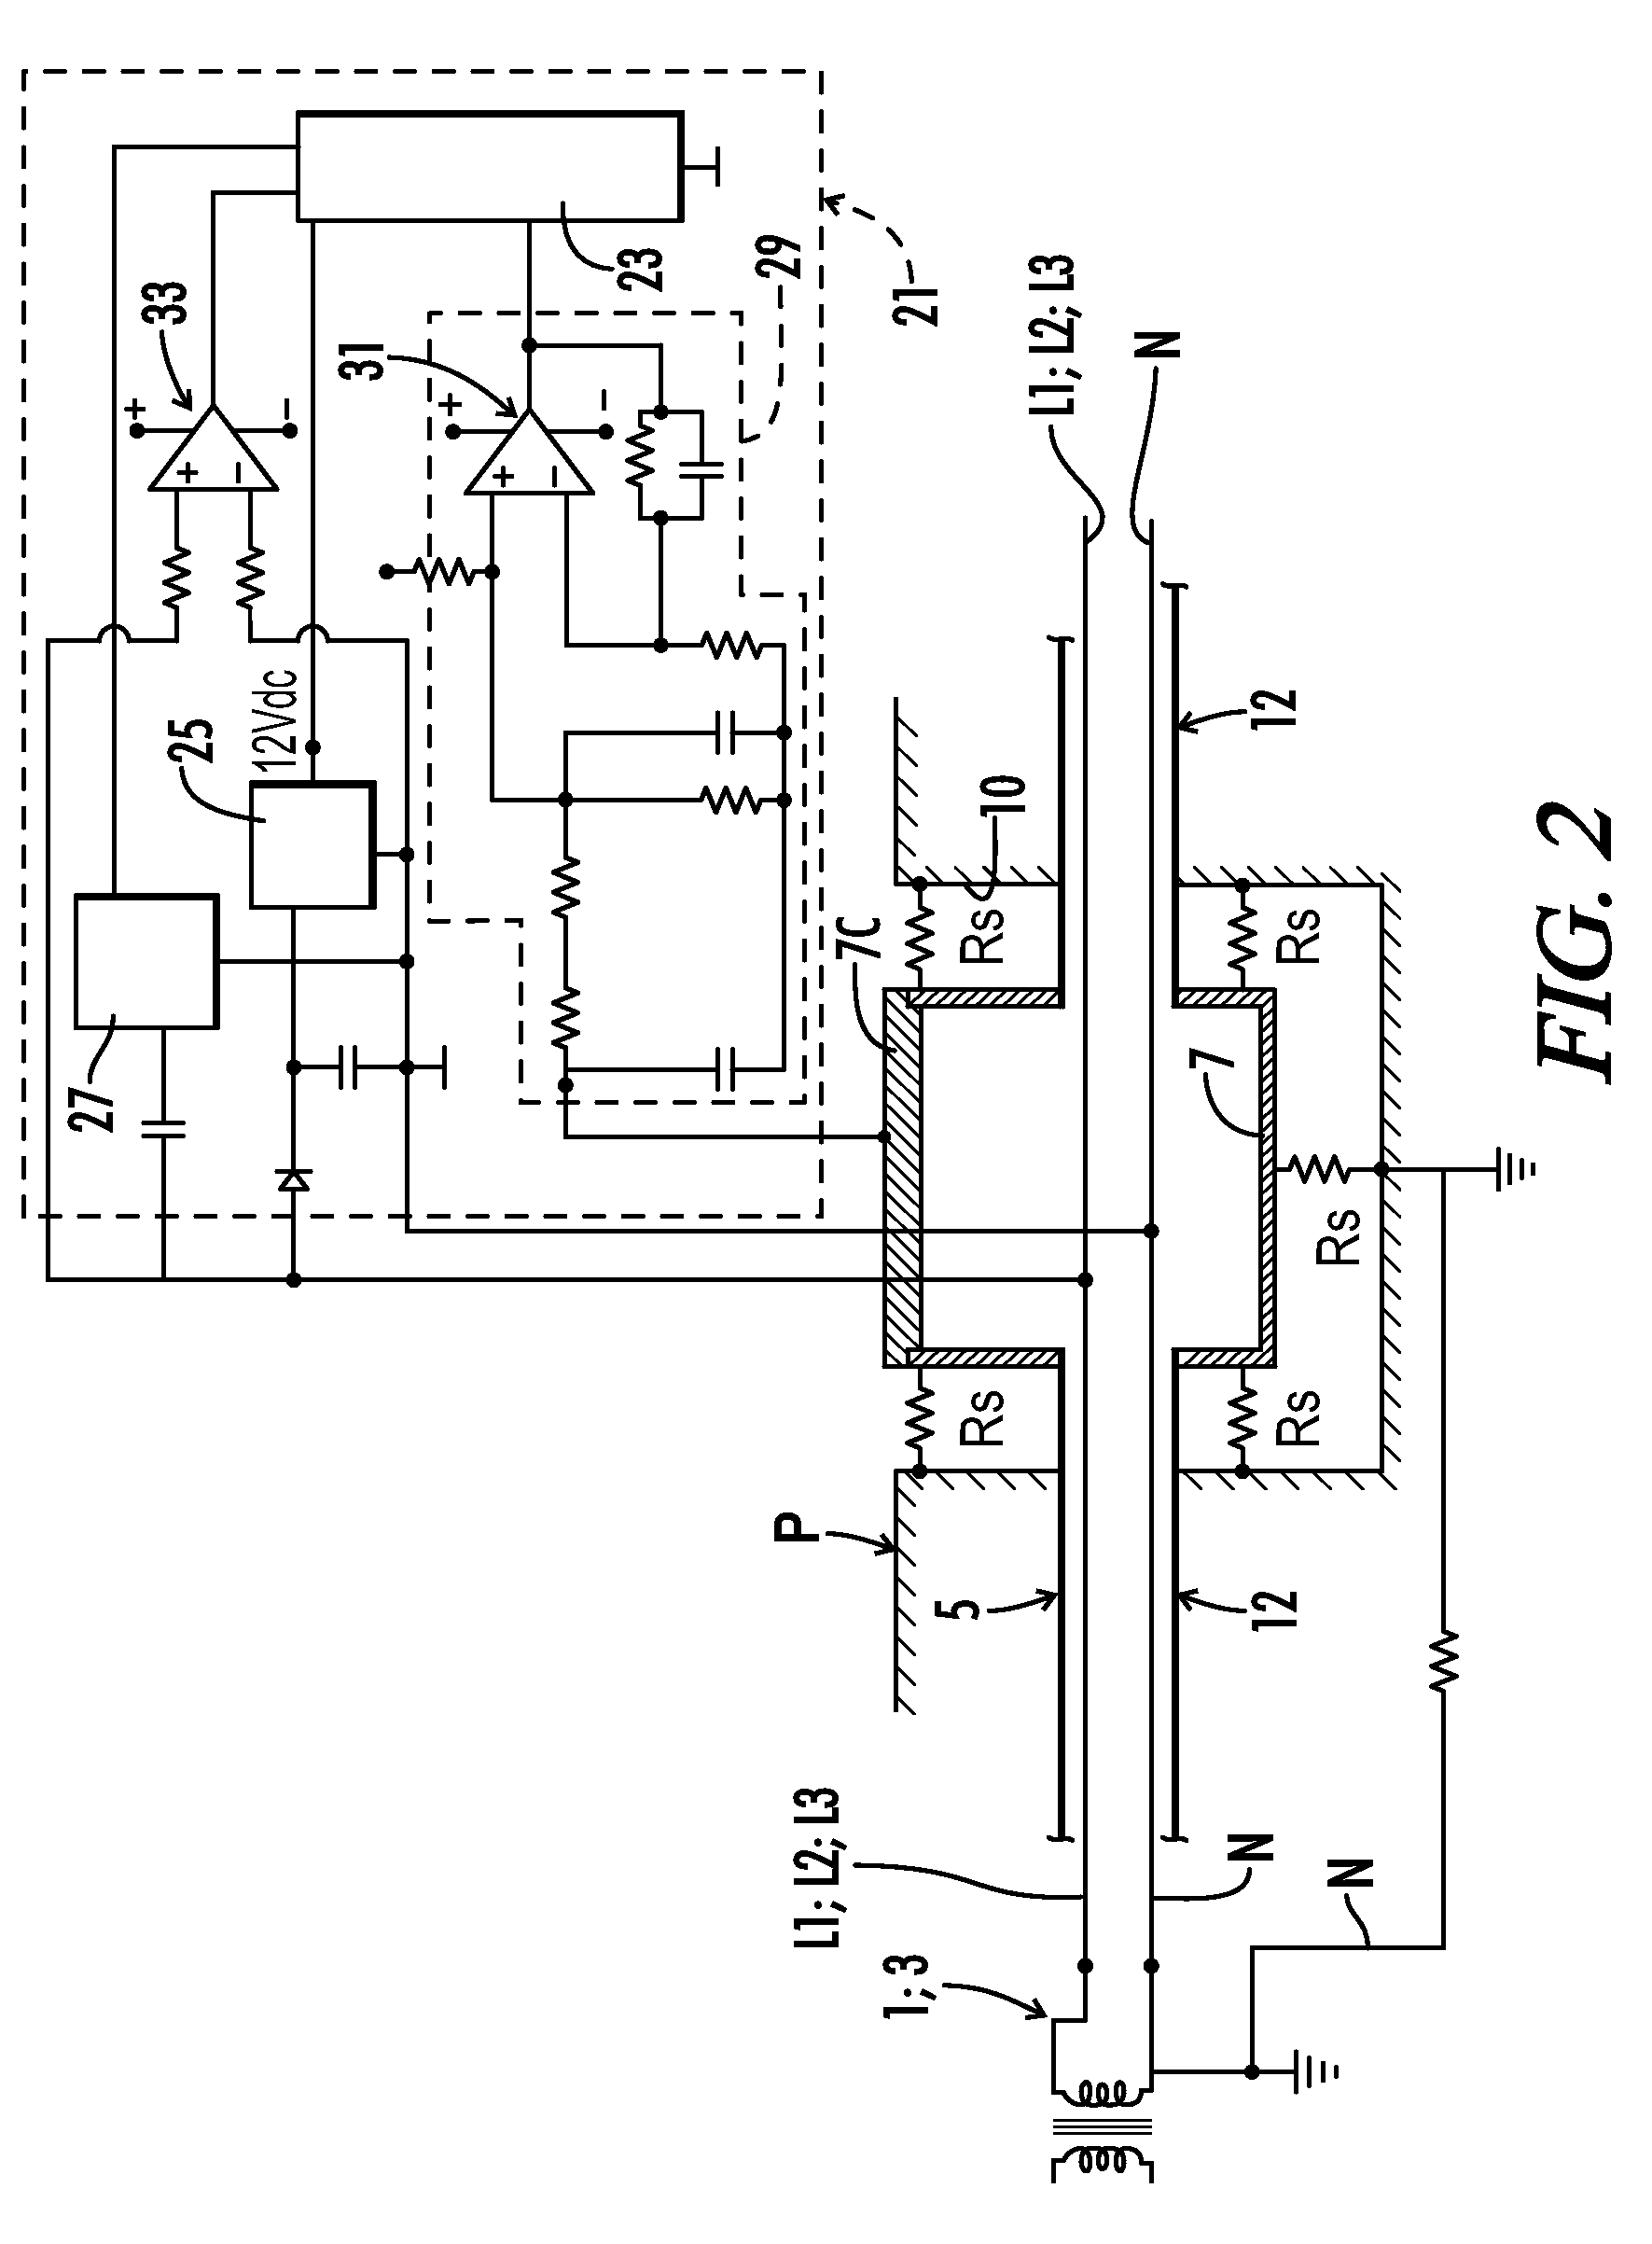 Electricity distribution network with stray voltage monitoring and method of transmission of information on said network